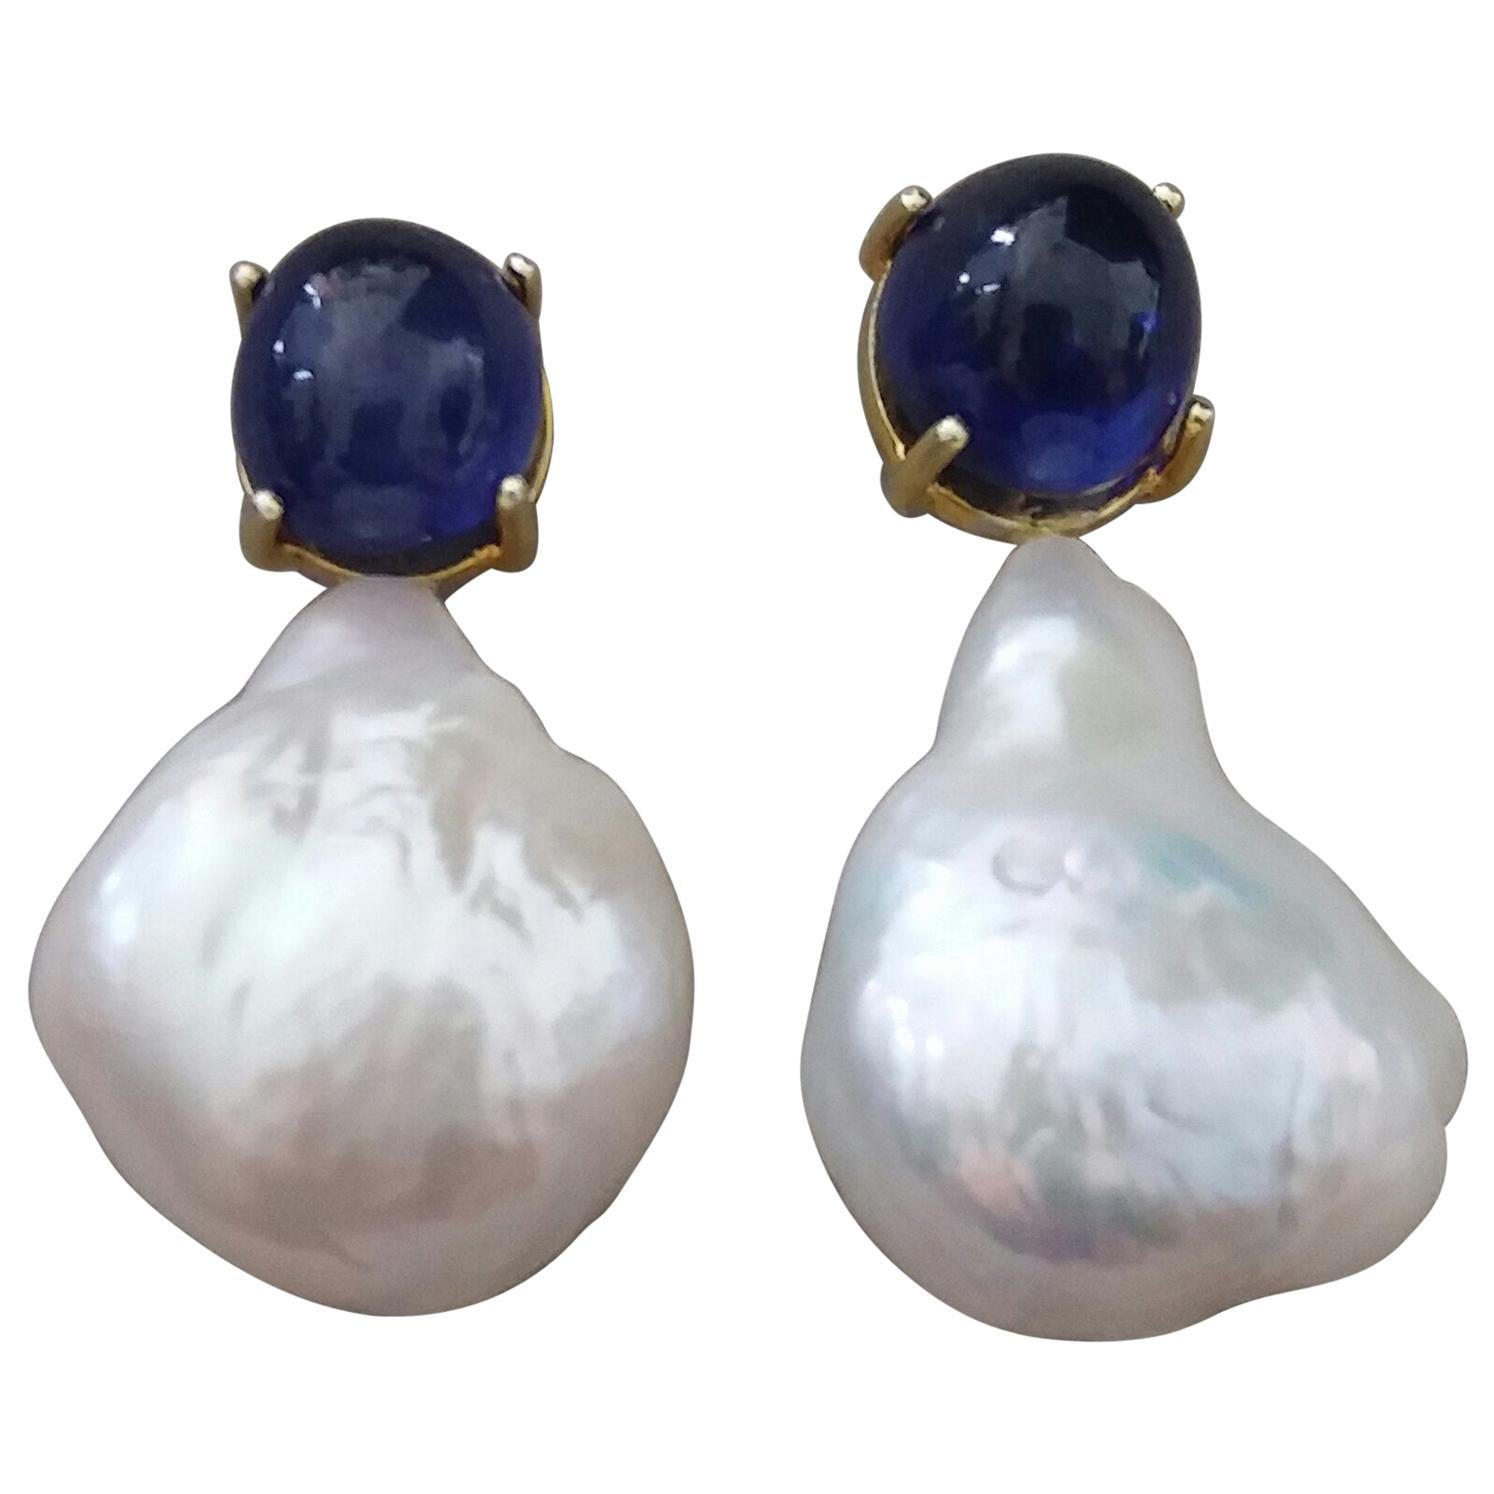 Big Size Pear Baroque Pearls Oval Blue Sapphires Cabochons Yellow Gold Earrings